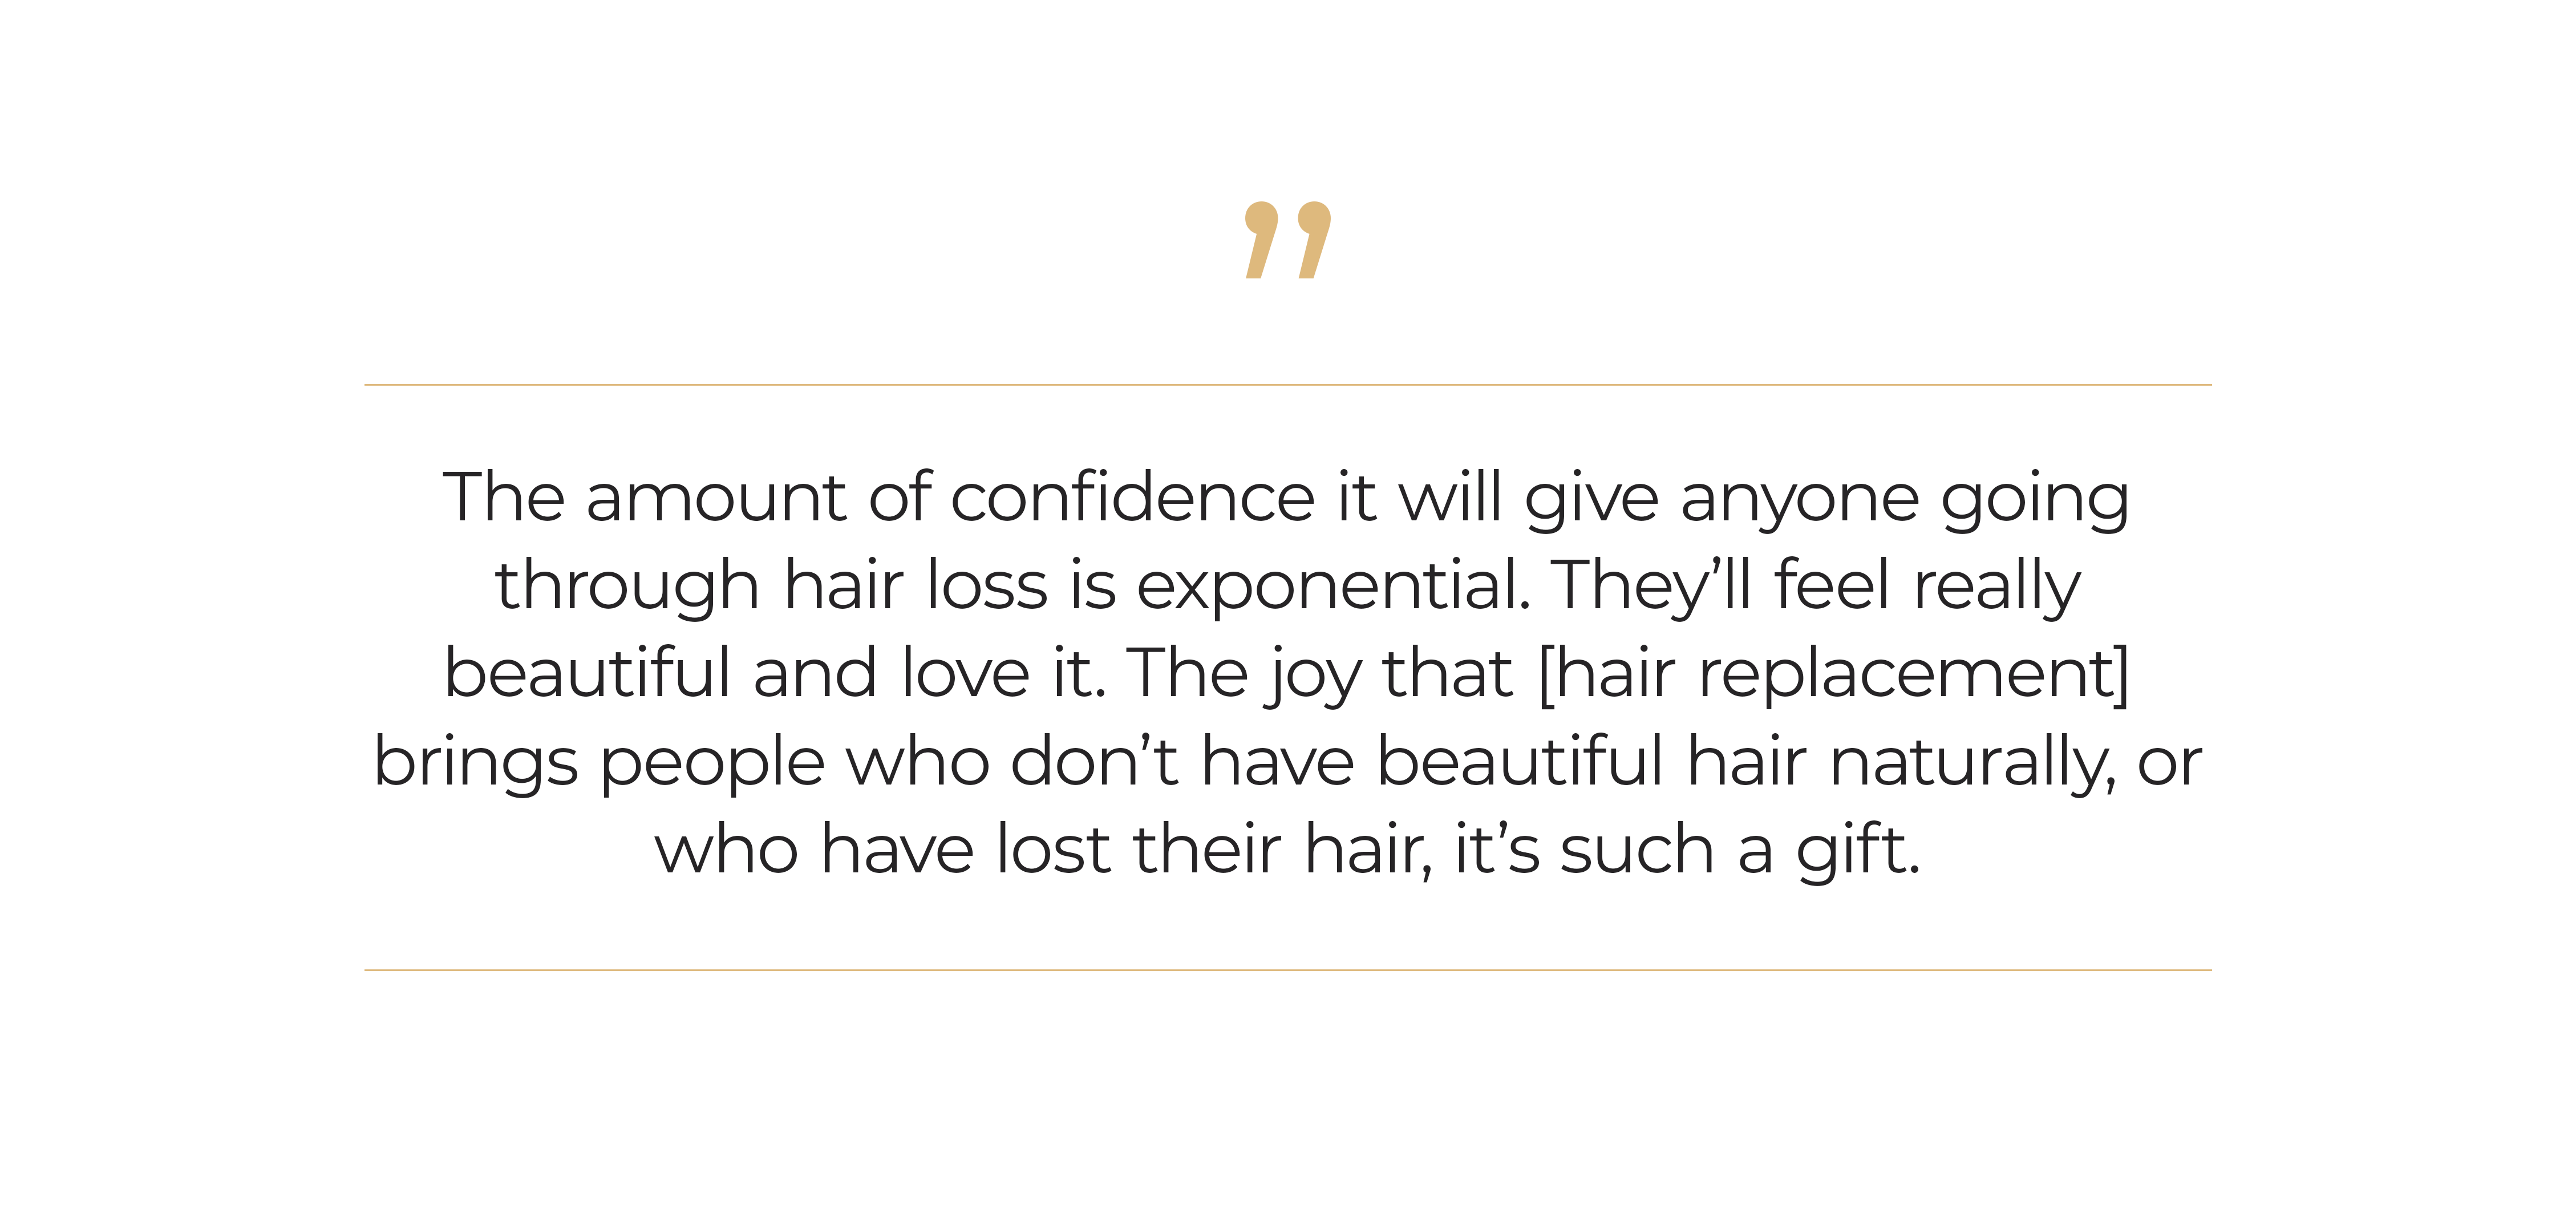 The amount of confidence it will give anyone going through hair loss is exponential. They’ll feel really beautiful and love it. The joy that [hair replacement] brings peoplewhodon’t have beautiful hair naturally, or who have lost their hair, it’s such a gift.